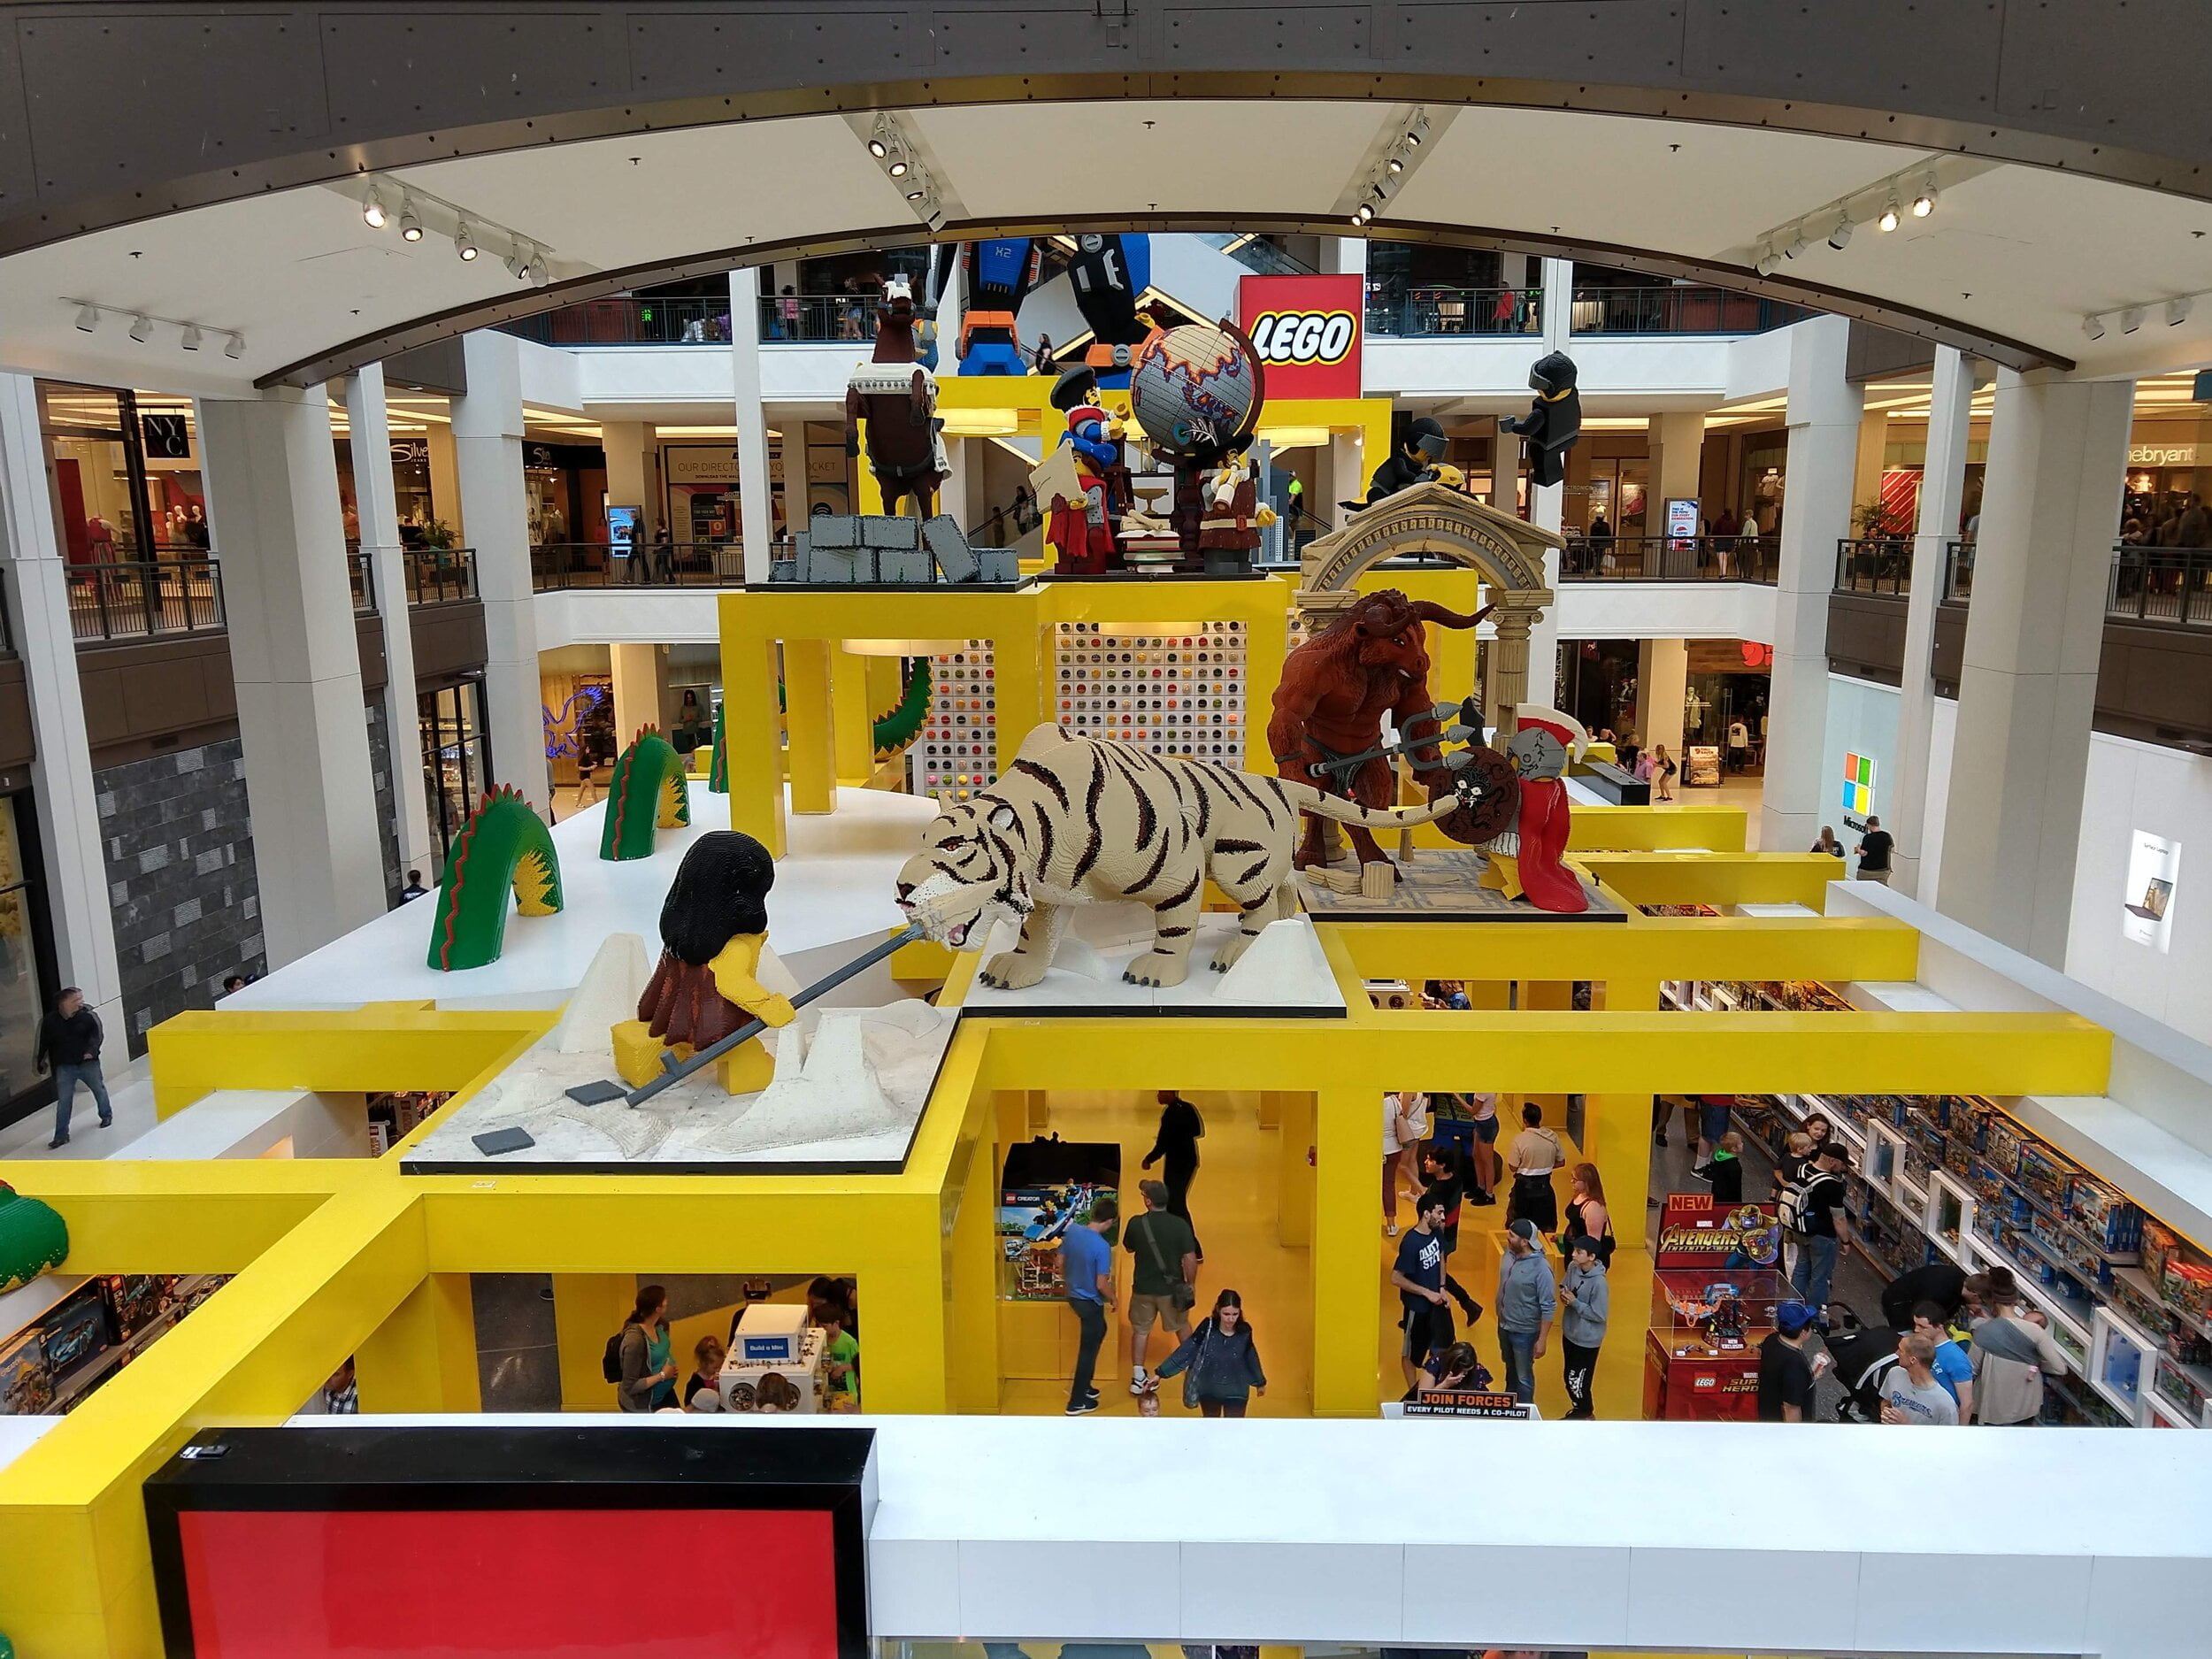 Lego To Open Experiential Retail Space At West Edmonton Mall This Fall